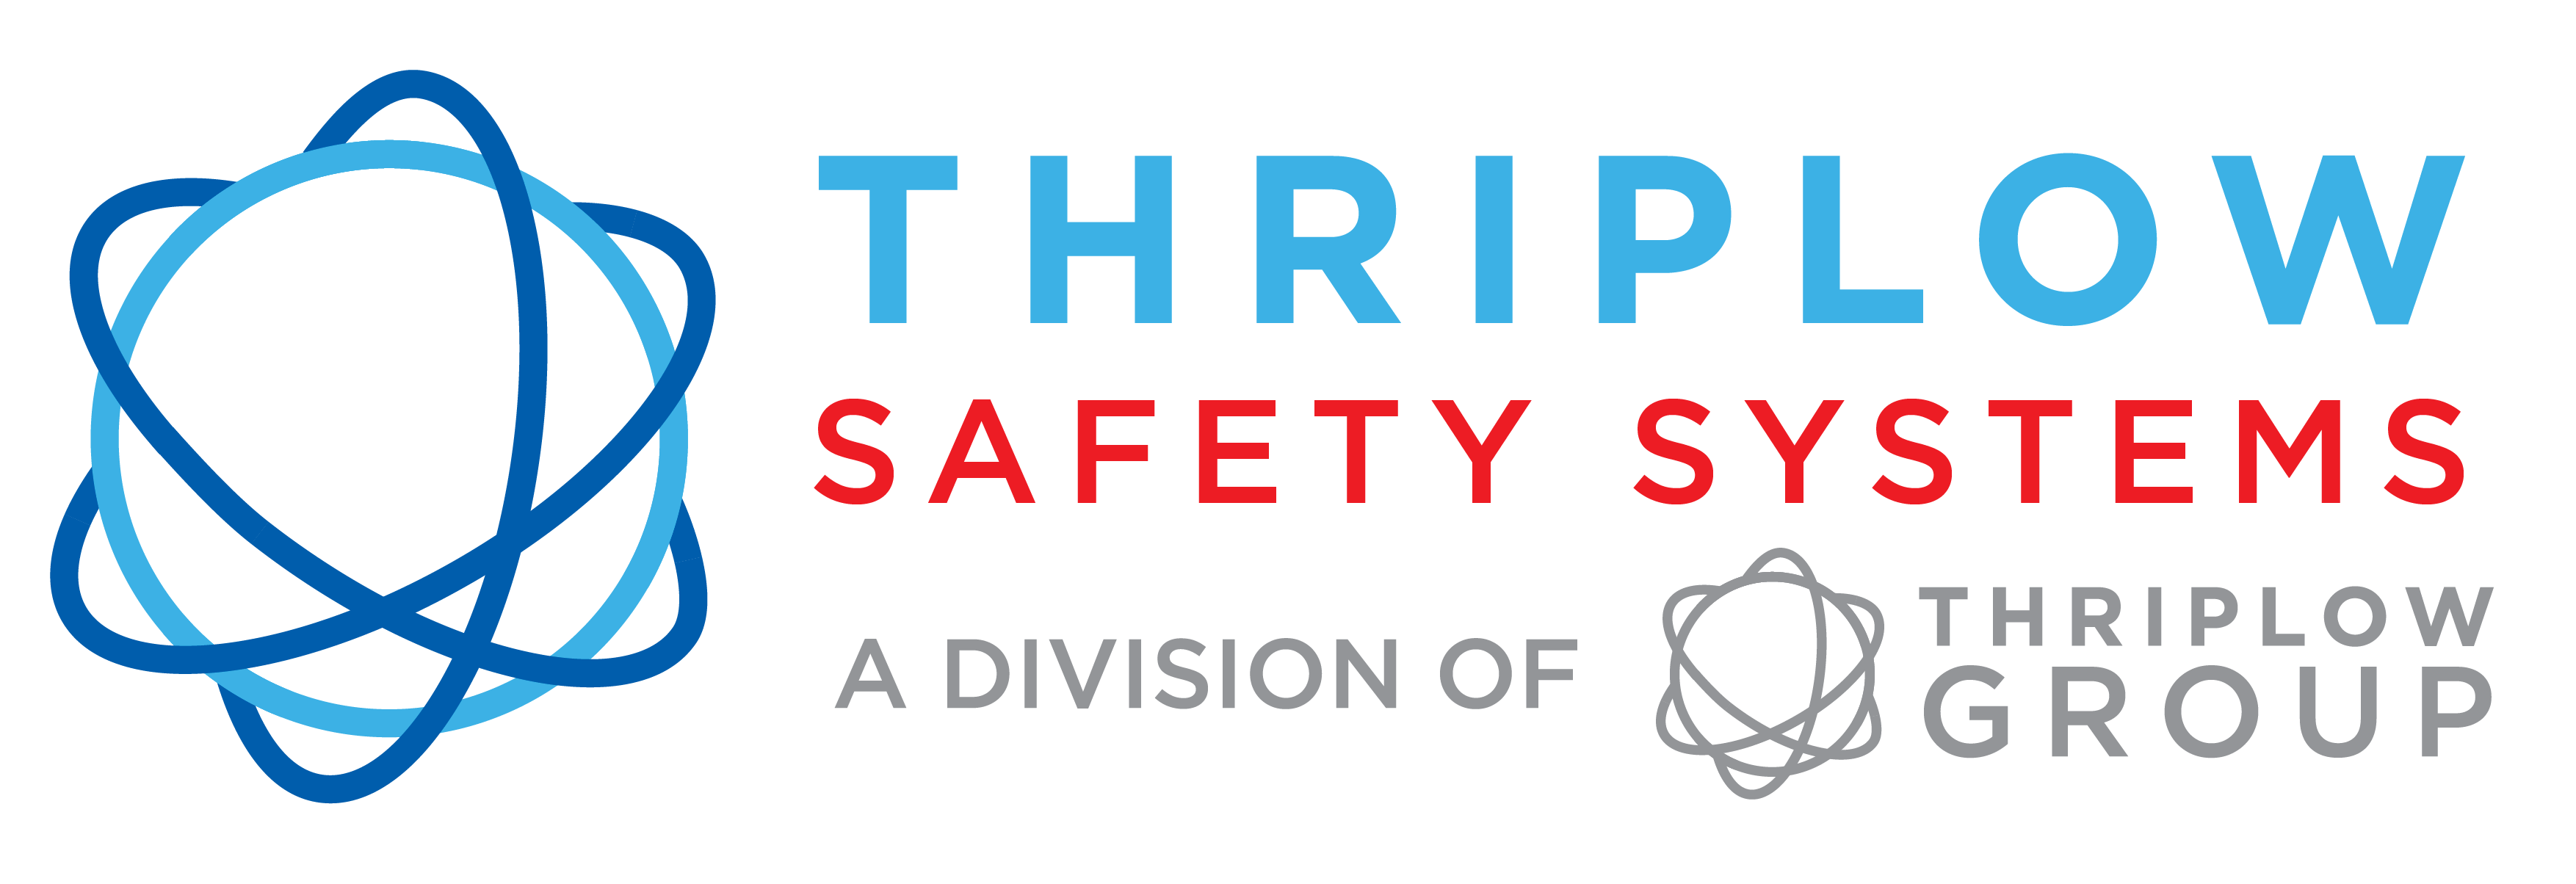 Thriplow safety systems Logo-01